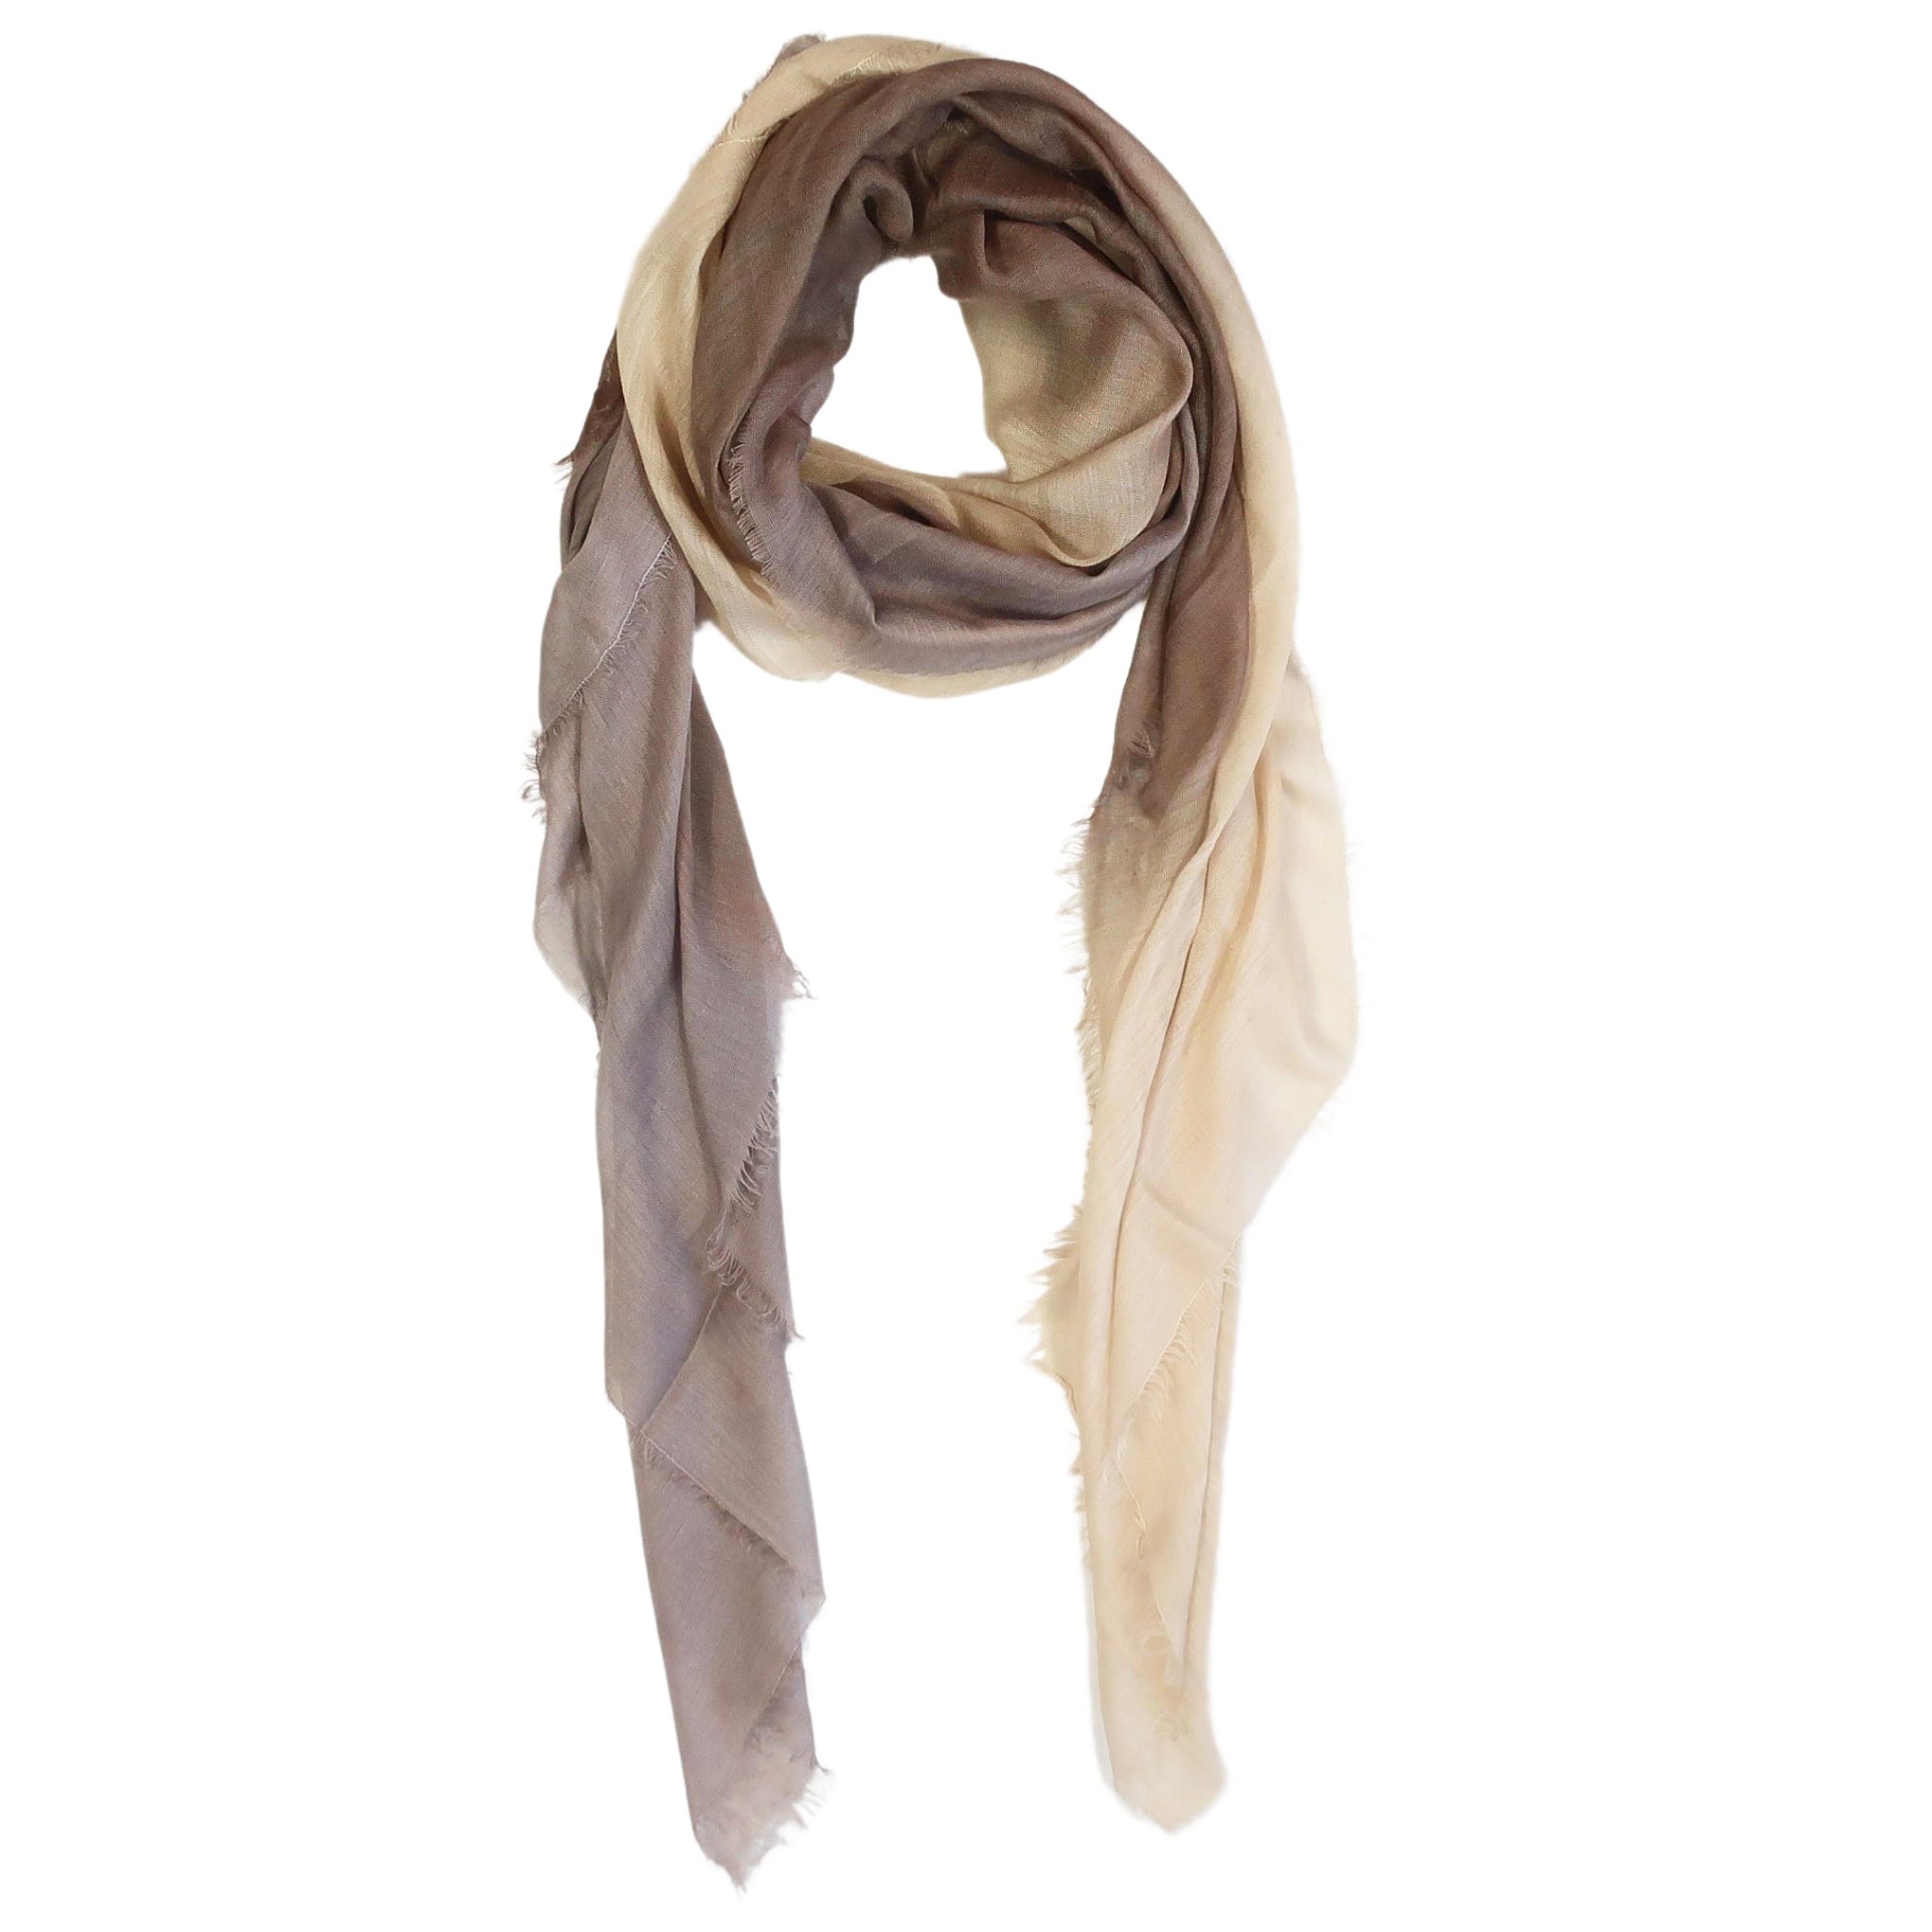 Blue Pacific Dream Cashmere and Silk Scarf in Tan and Taupe 47 x 37